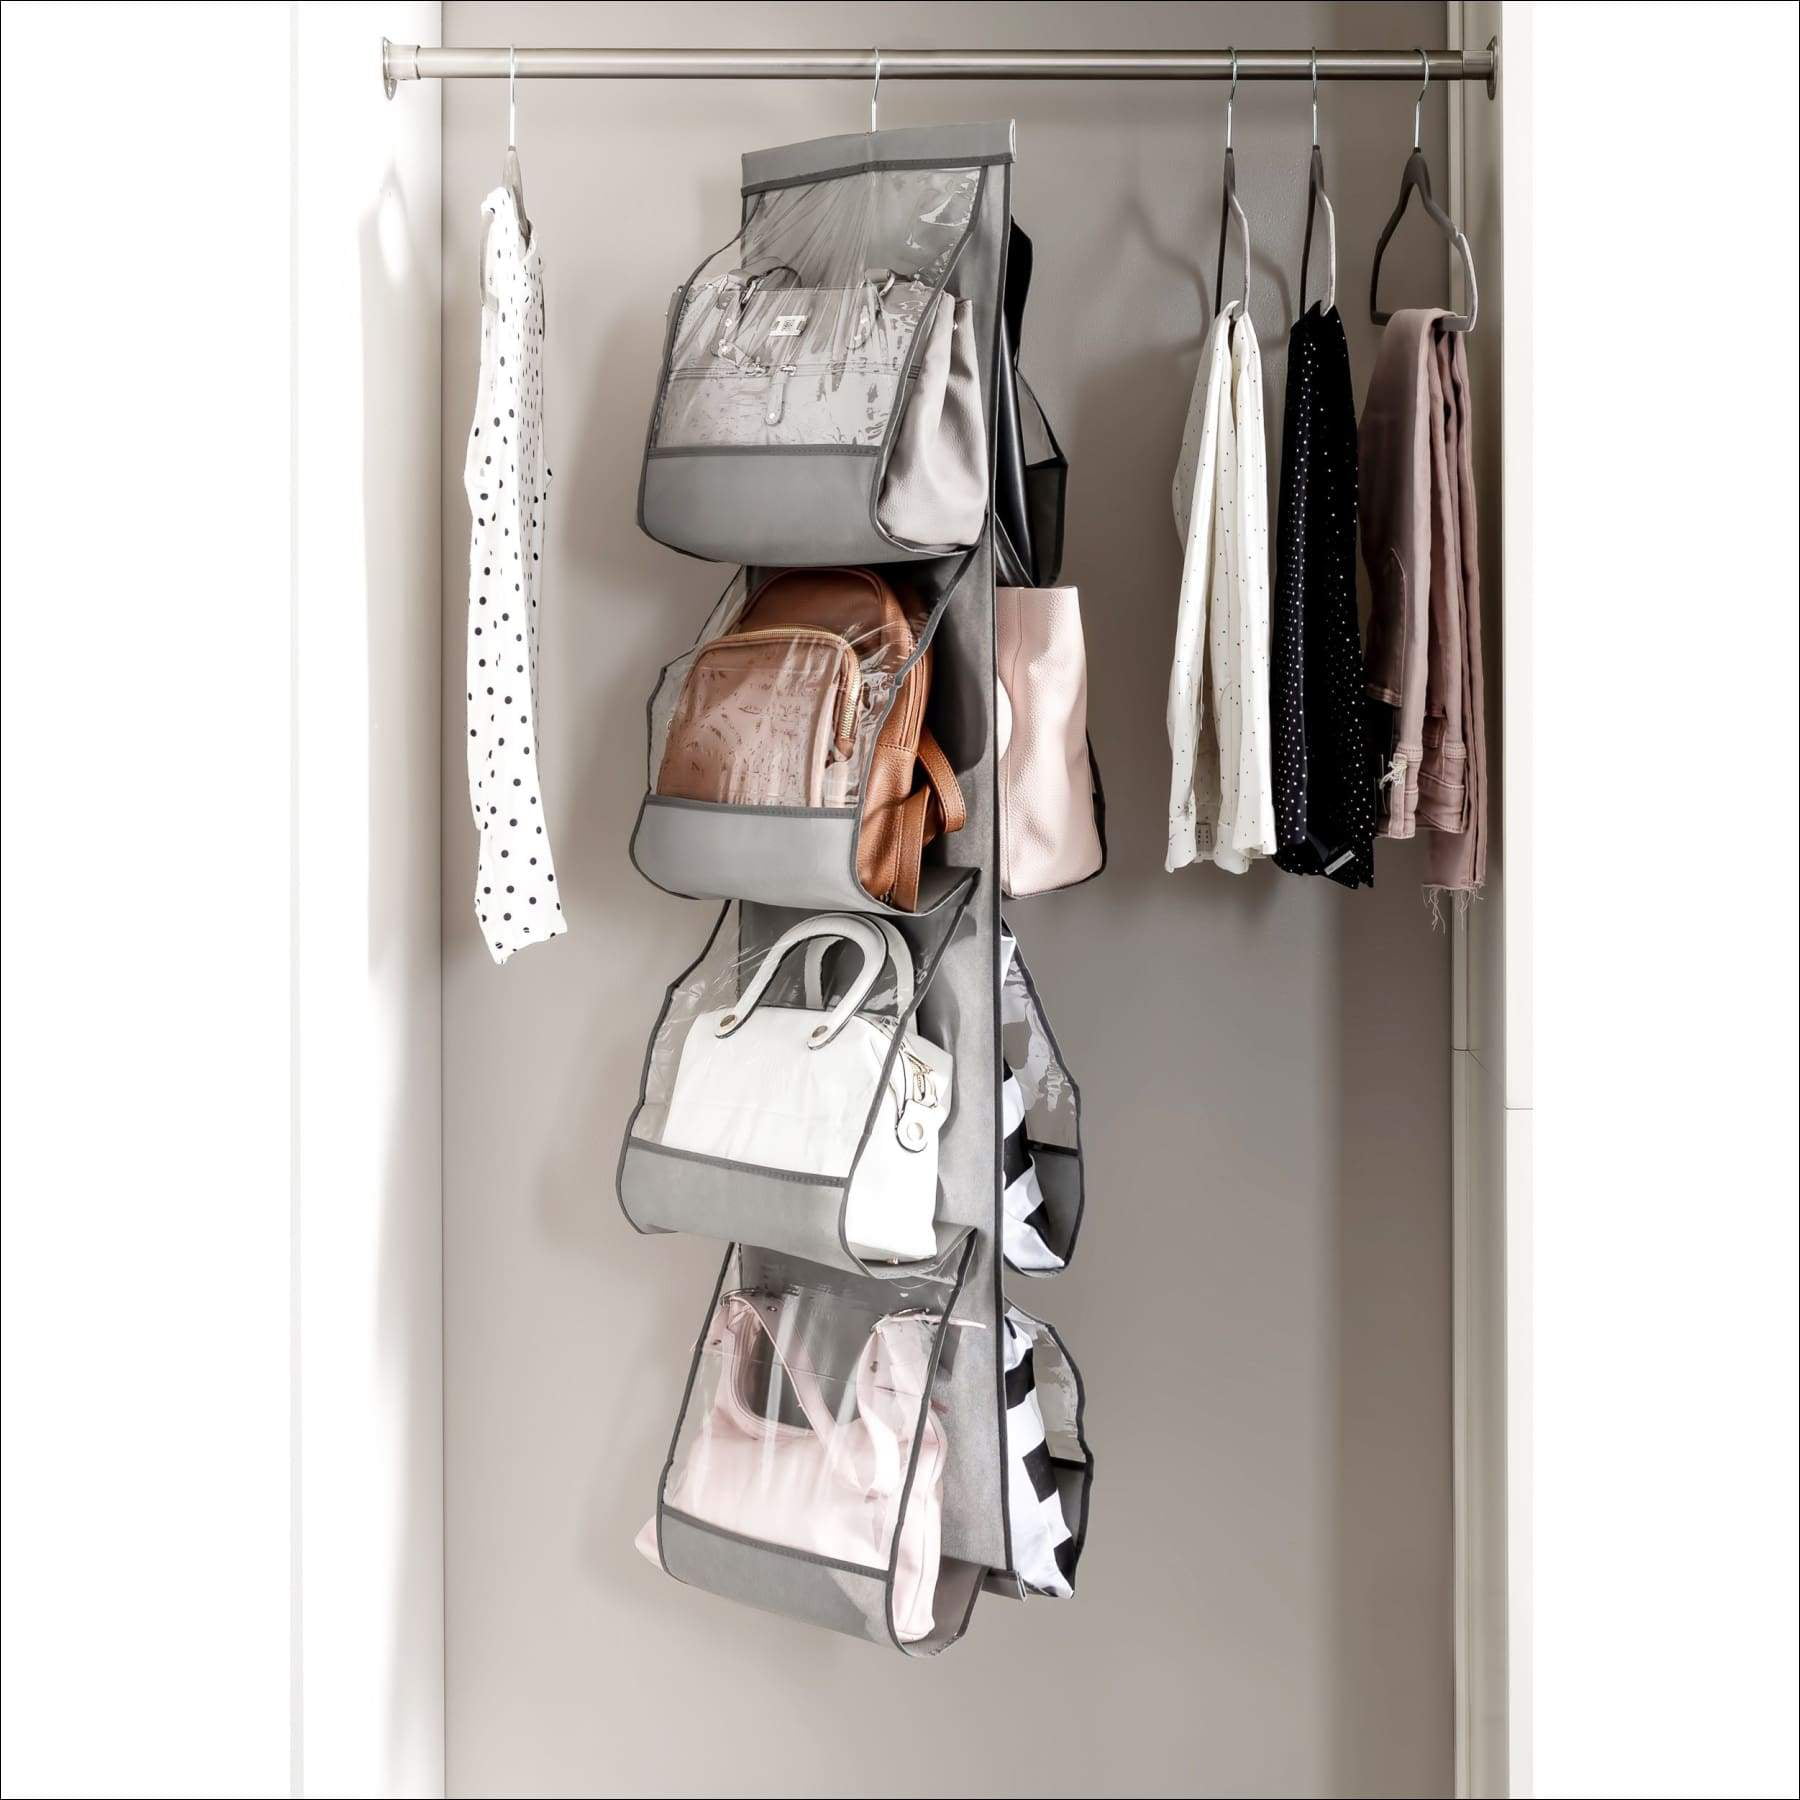 Zober Hanging Purse Organizer For Closet Clear Handbag Organizer For Purses,  Handbags Etc. 8 Easy Access Clear Vinyl Pockets With 360 Degree Swivel  Hook, Gray, 48” L x 13.8” W 48 L x 1 